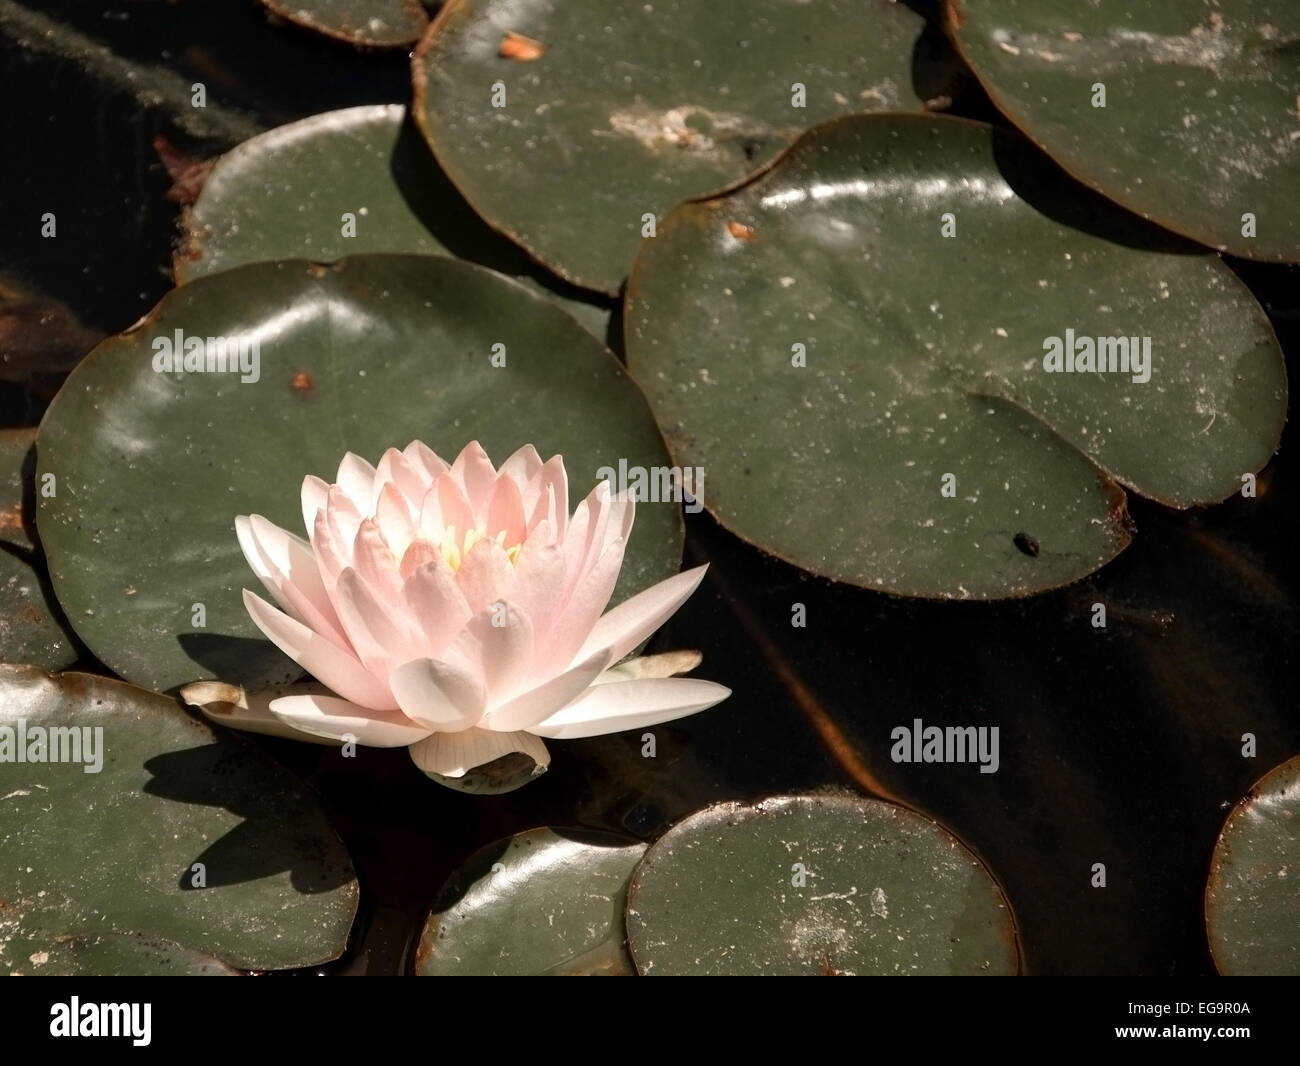 Delicate pink waterlily blossoming among dirty green leaves concept for contrast, beauty in nature, against all odds. Stock Photo